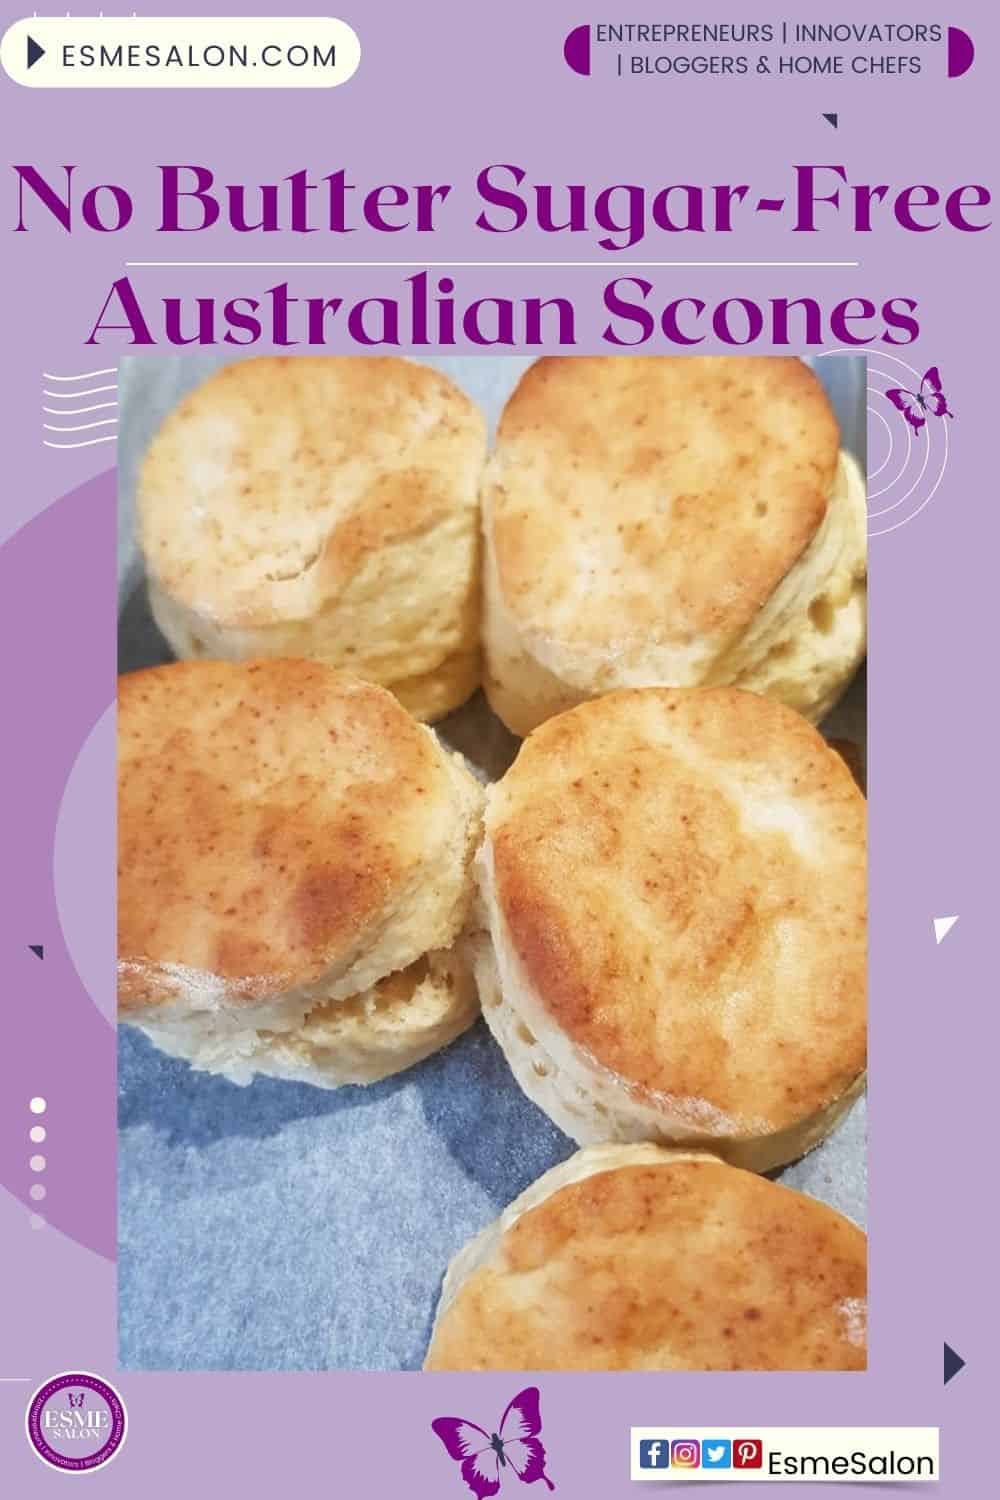 an image of a serving tray with 5 No Butter Sugar-Free Australian Scones